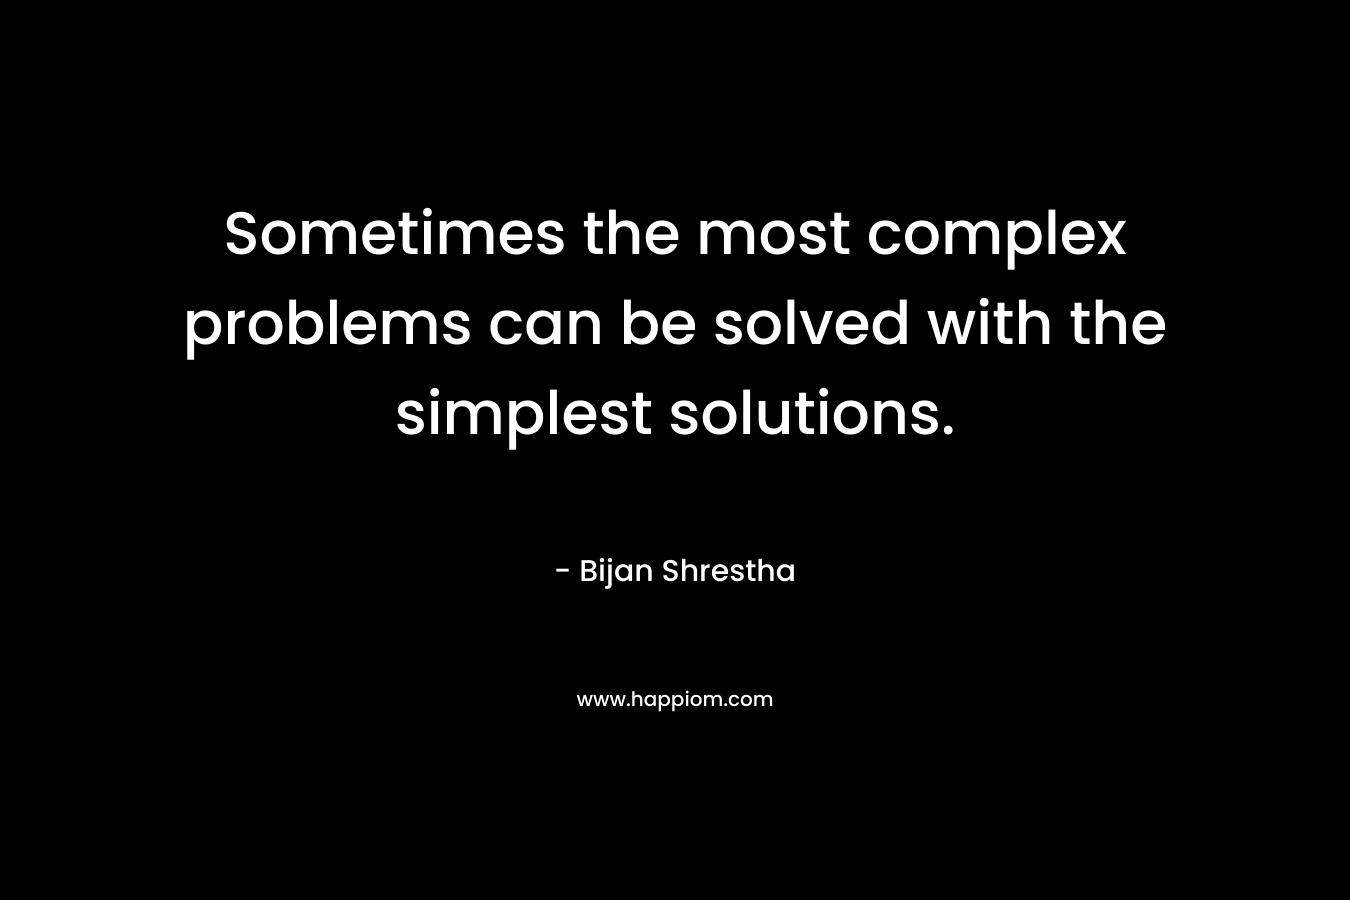 Sometimes the most complex problems can be solved with the simplest solutions. – Bijan Shrestha